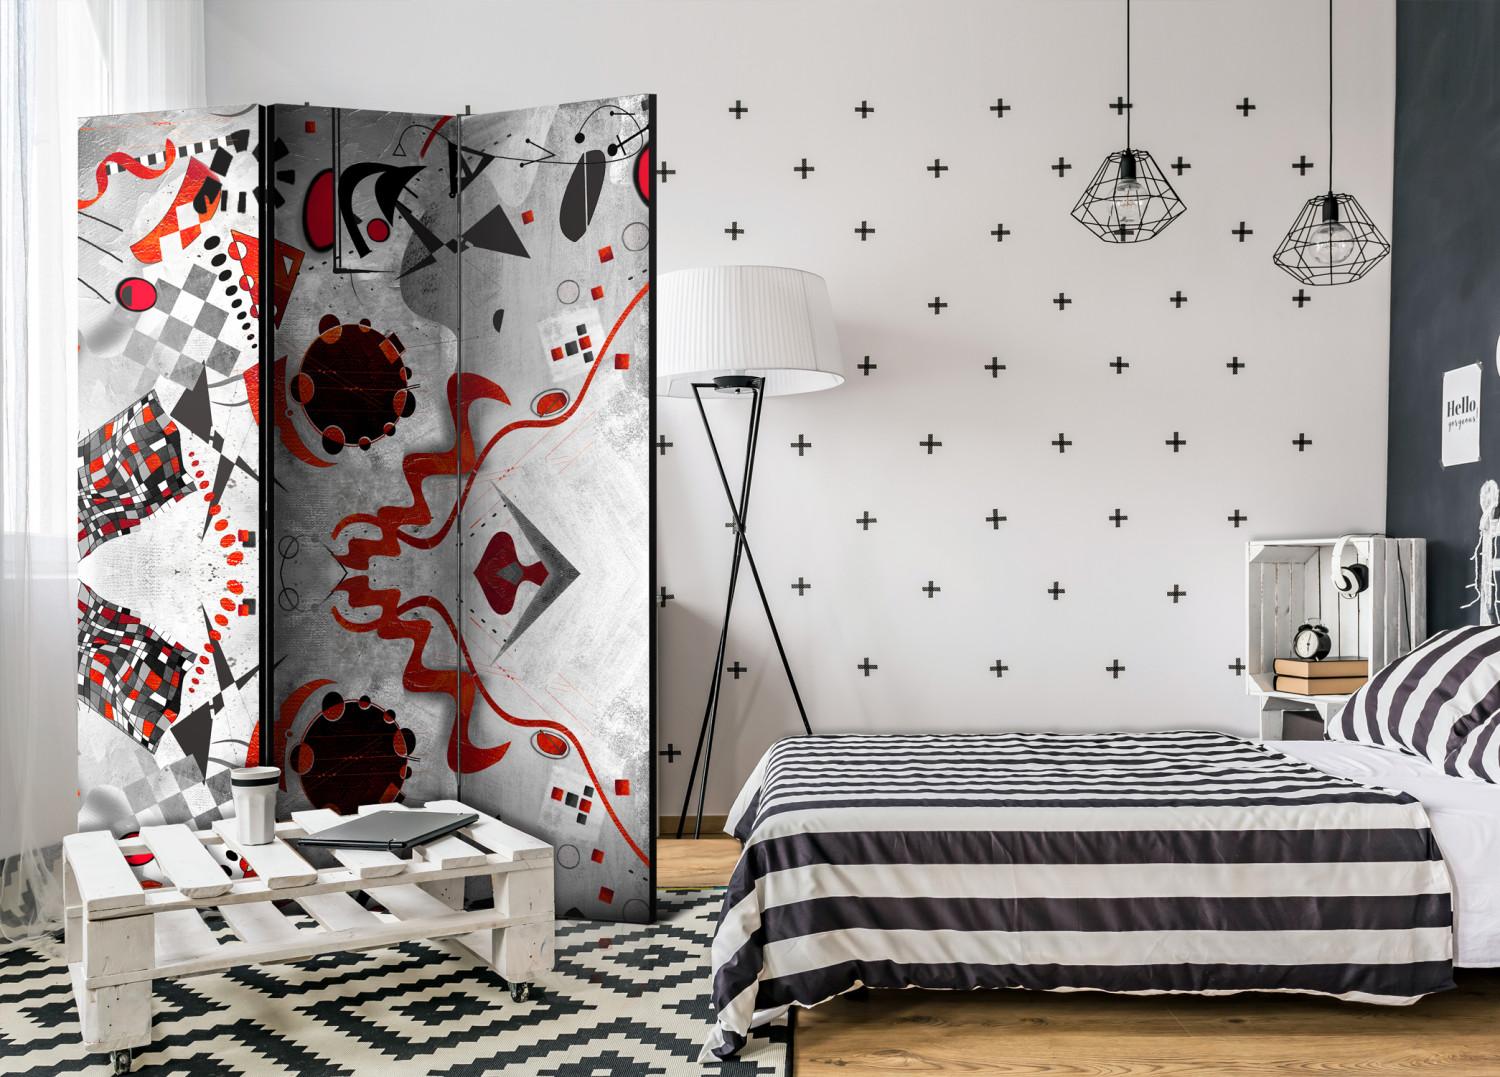 Room Divider Geometric Cosmos - abstract geometric figures on texture